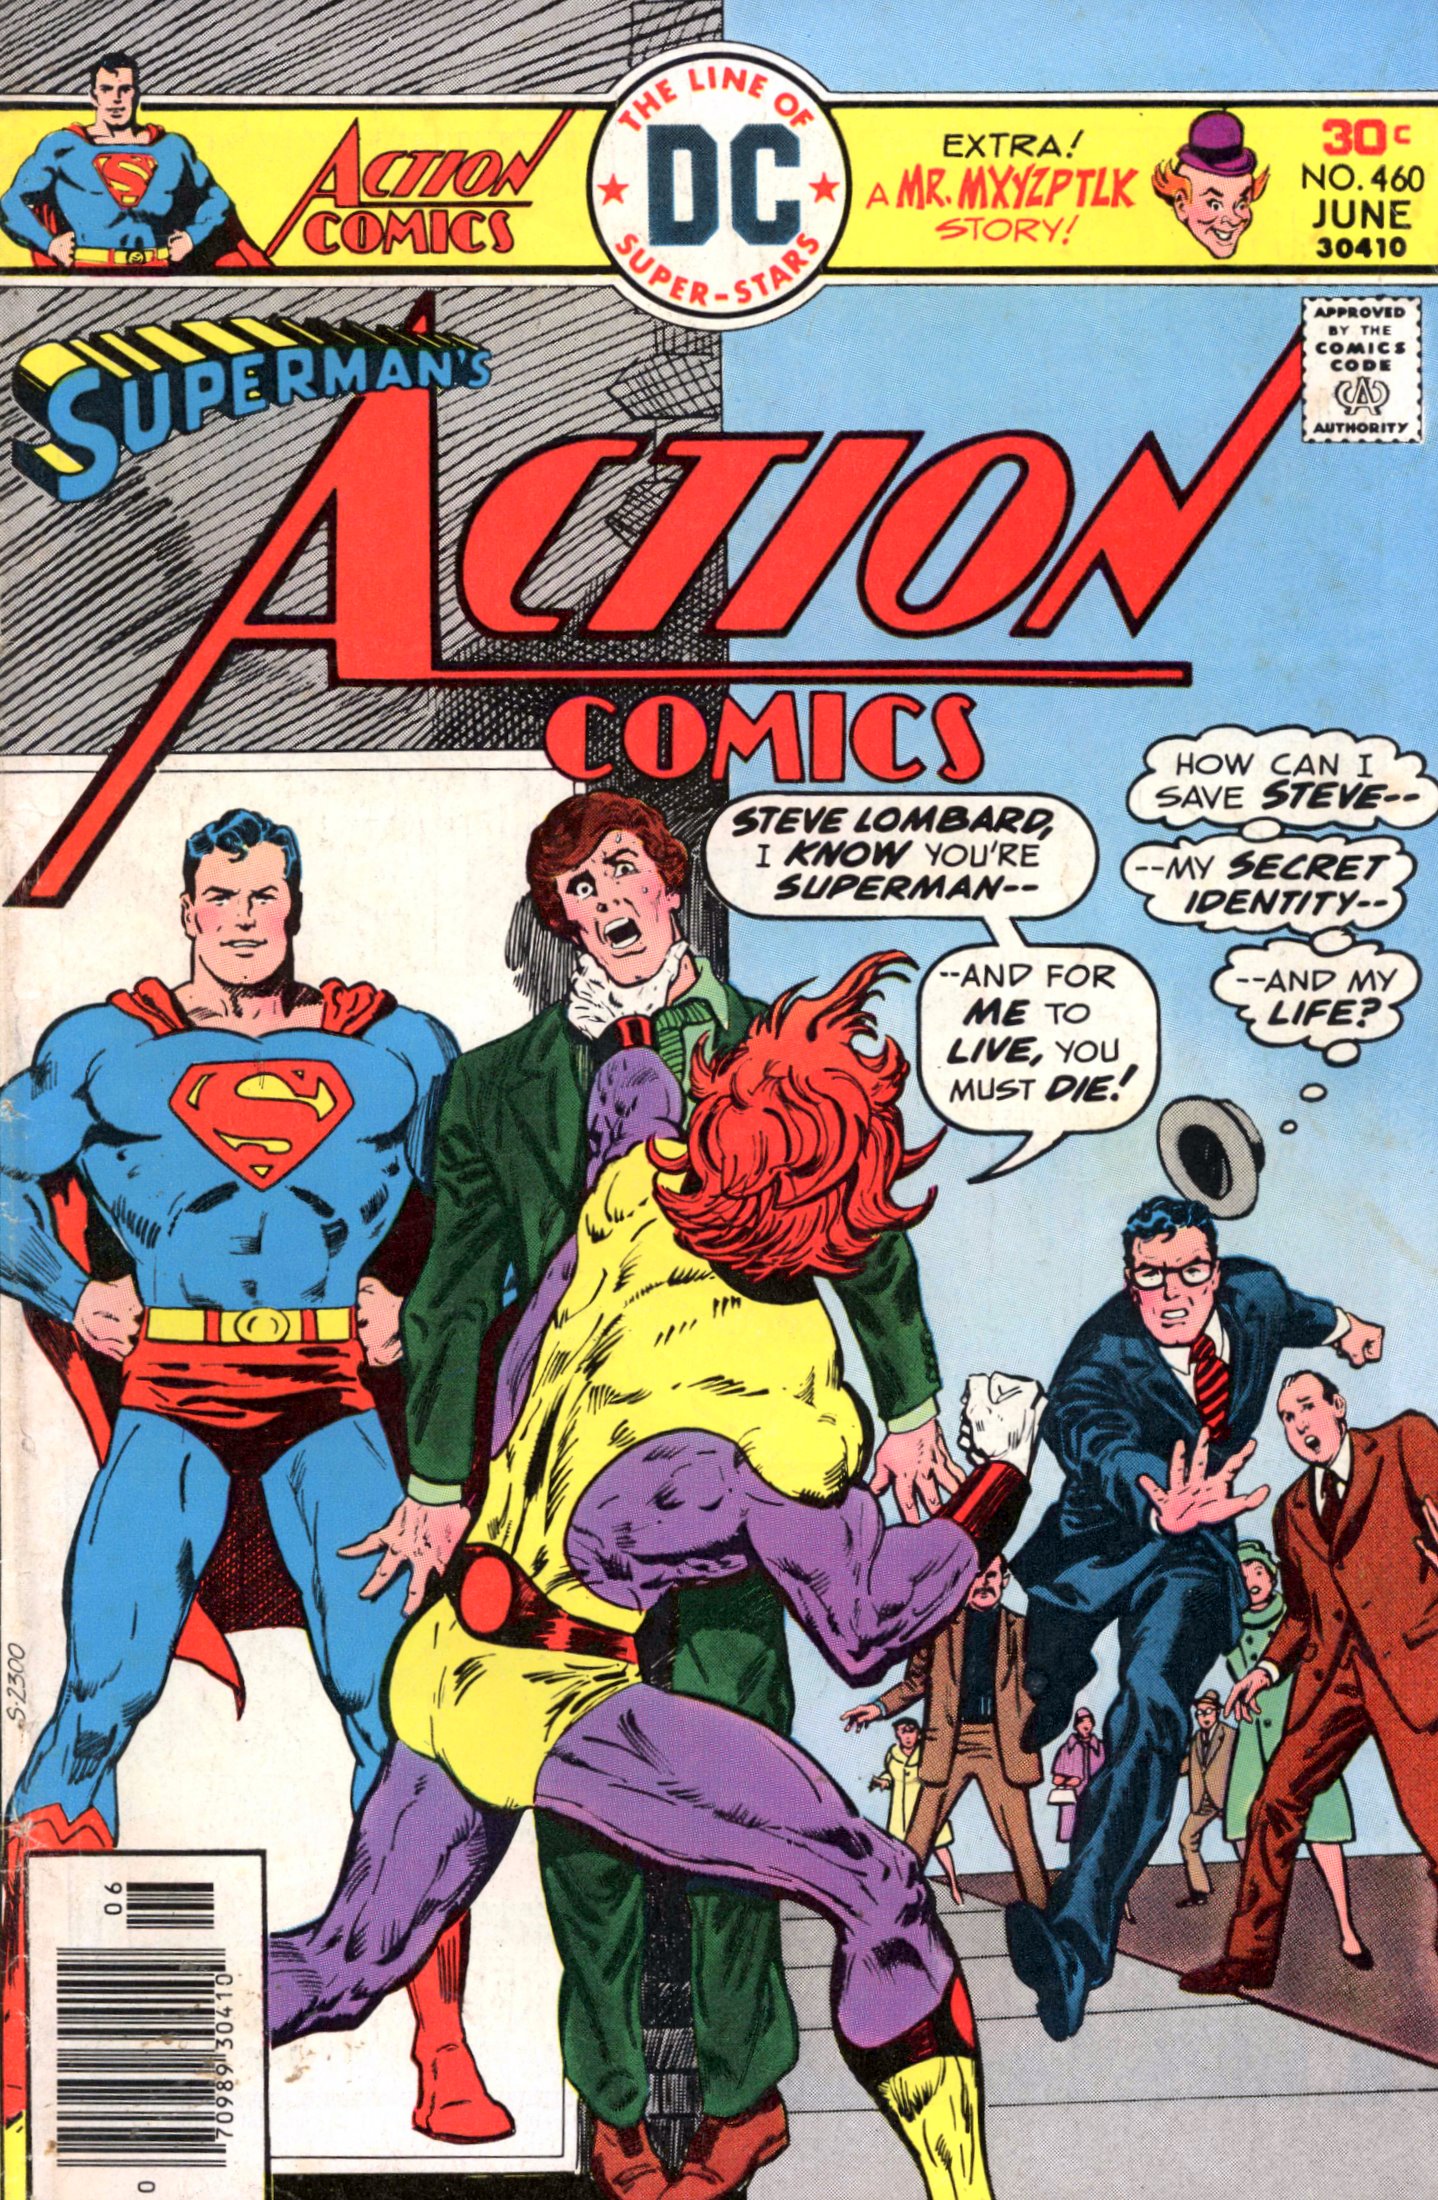 Read online Action Comics (1938) comic -  Issue #460 - 1